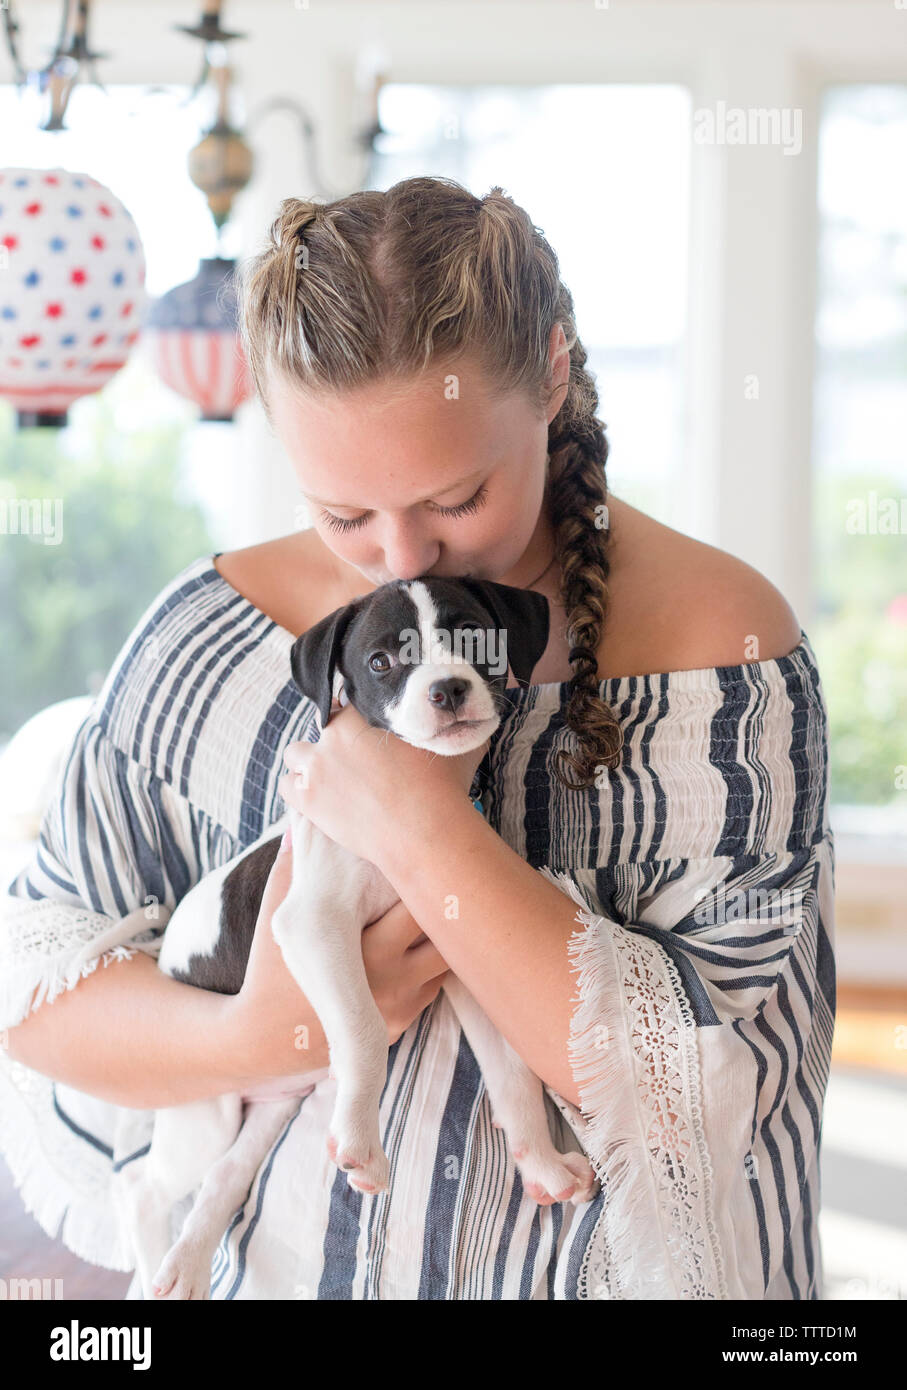 Teen girl with braids holding and kissing a new puppy indoors in Virgi Stock Photo